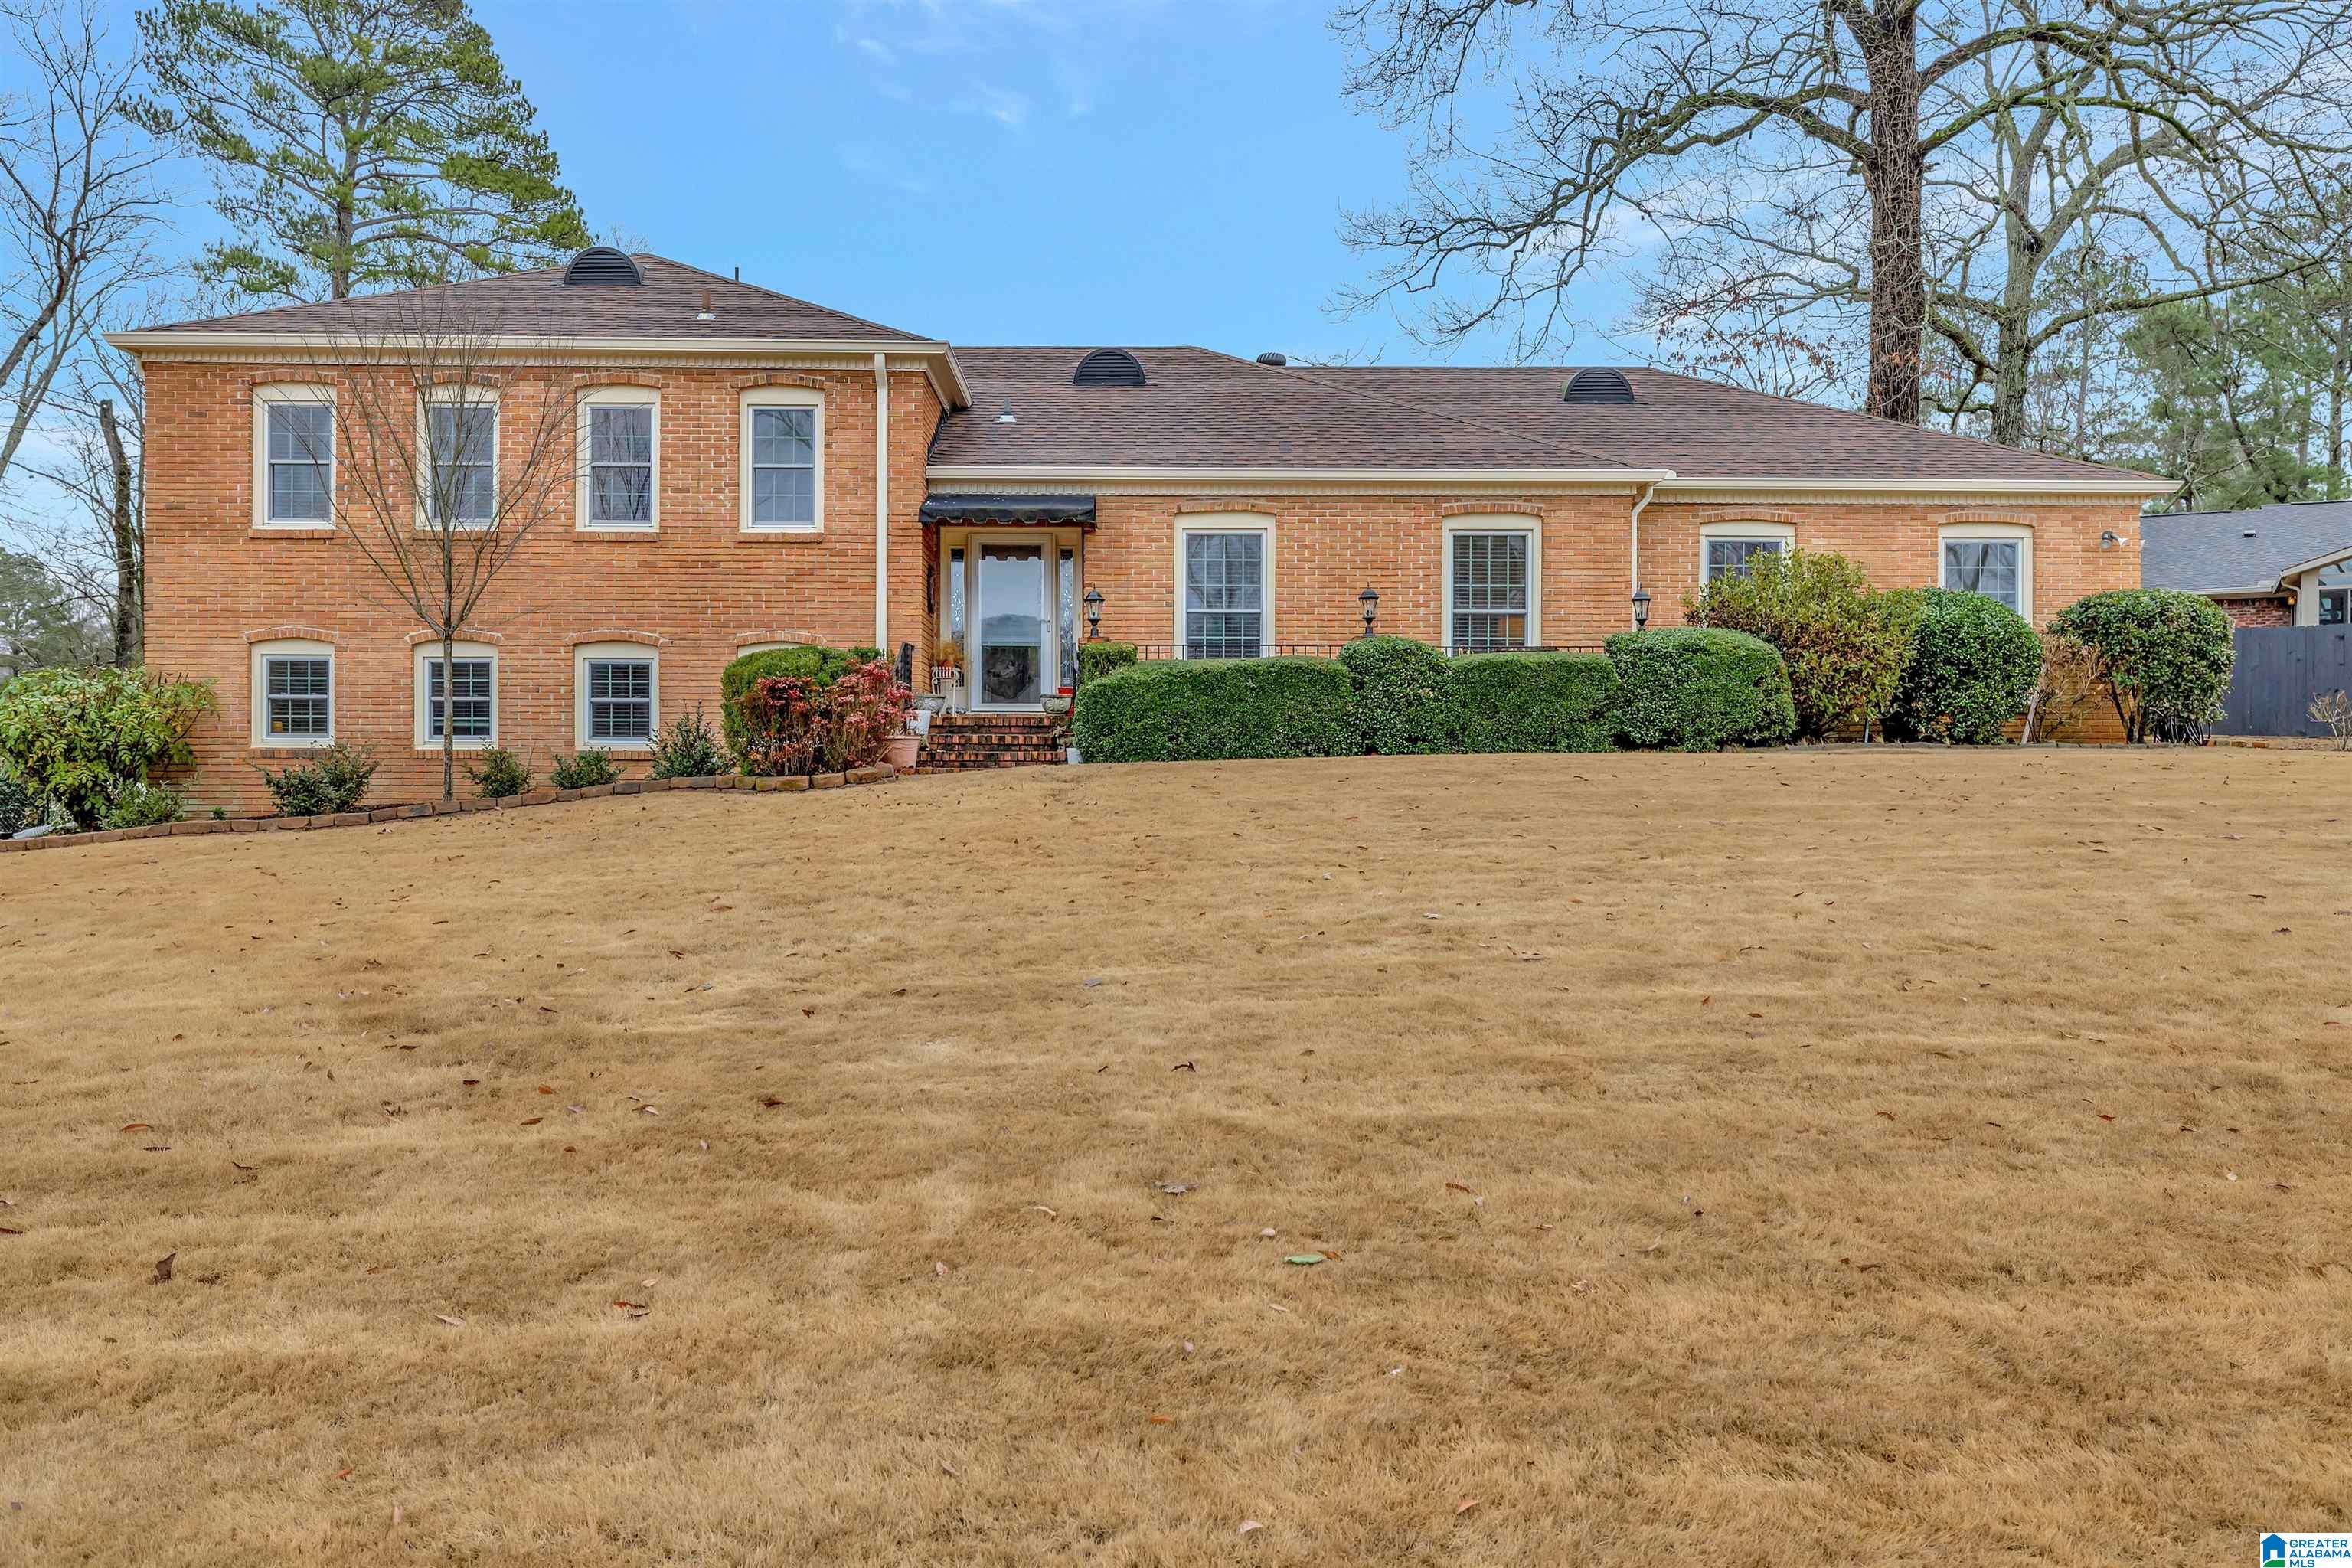 3409 PORTSMOUTH DRIVE, HOOVER, AL 35226